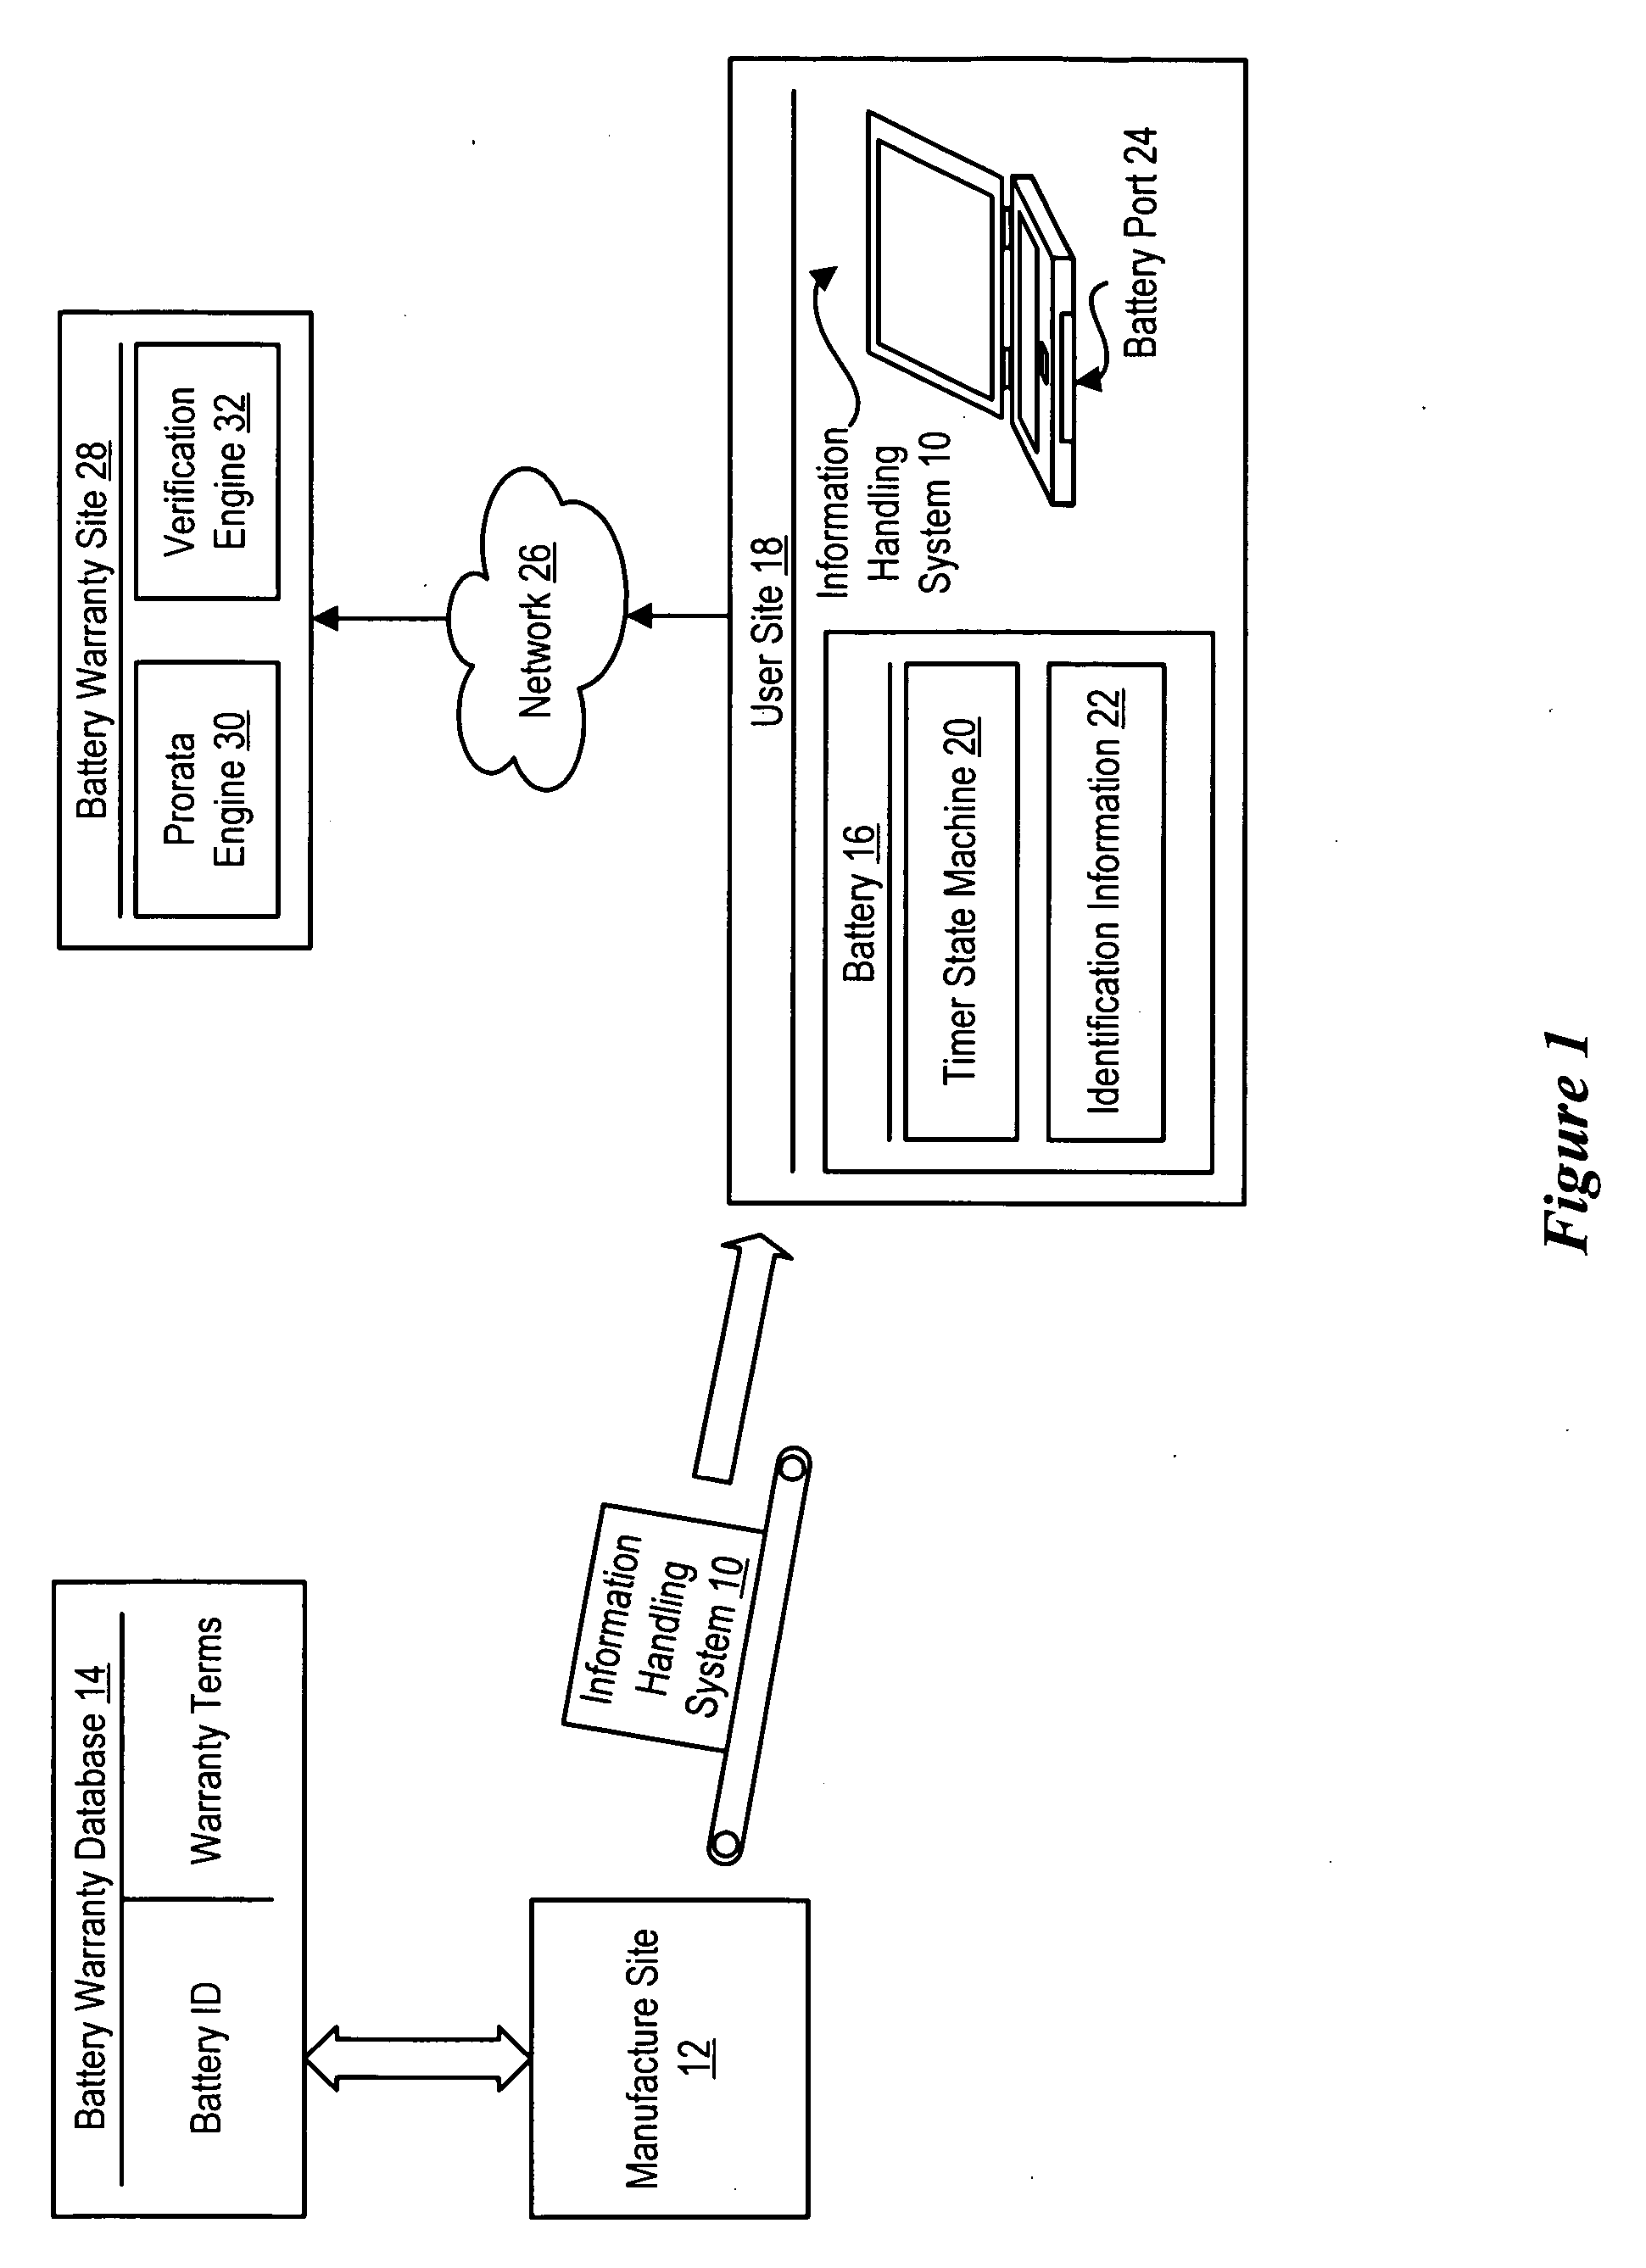 System and method for information handling system battery monitoring